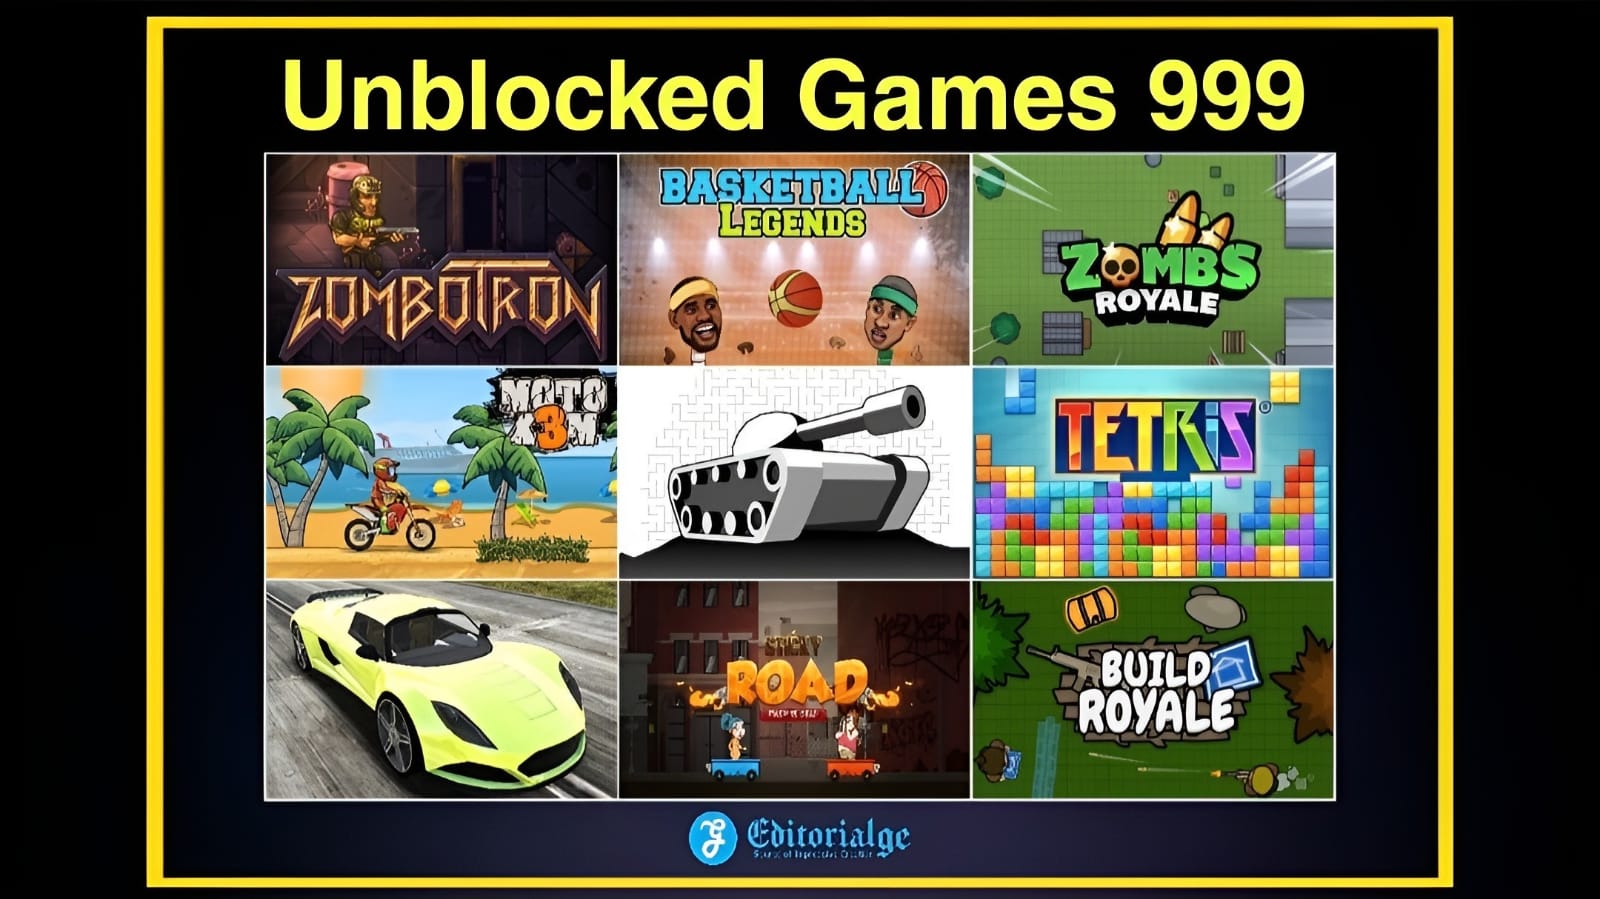 Top 120 Unblocked Games 999 - Fun and Play at Home or in the Office